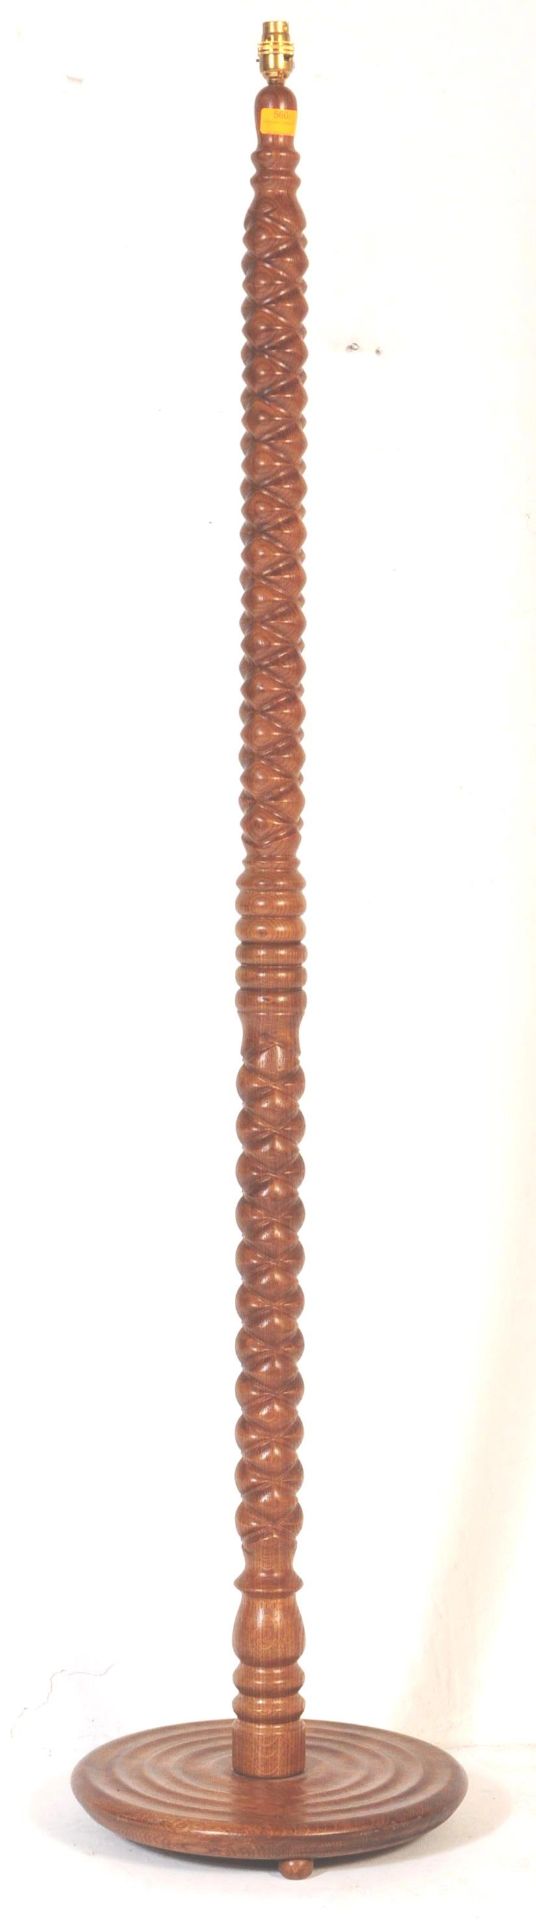 A VINTAGE SOLID WOOD FLOOR STANDING 'PINEAPPLE' LAMP STAND